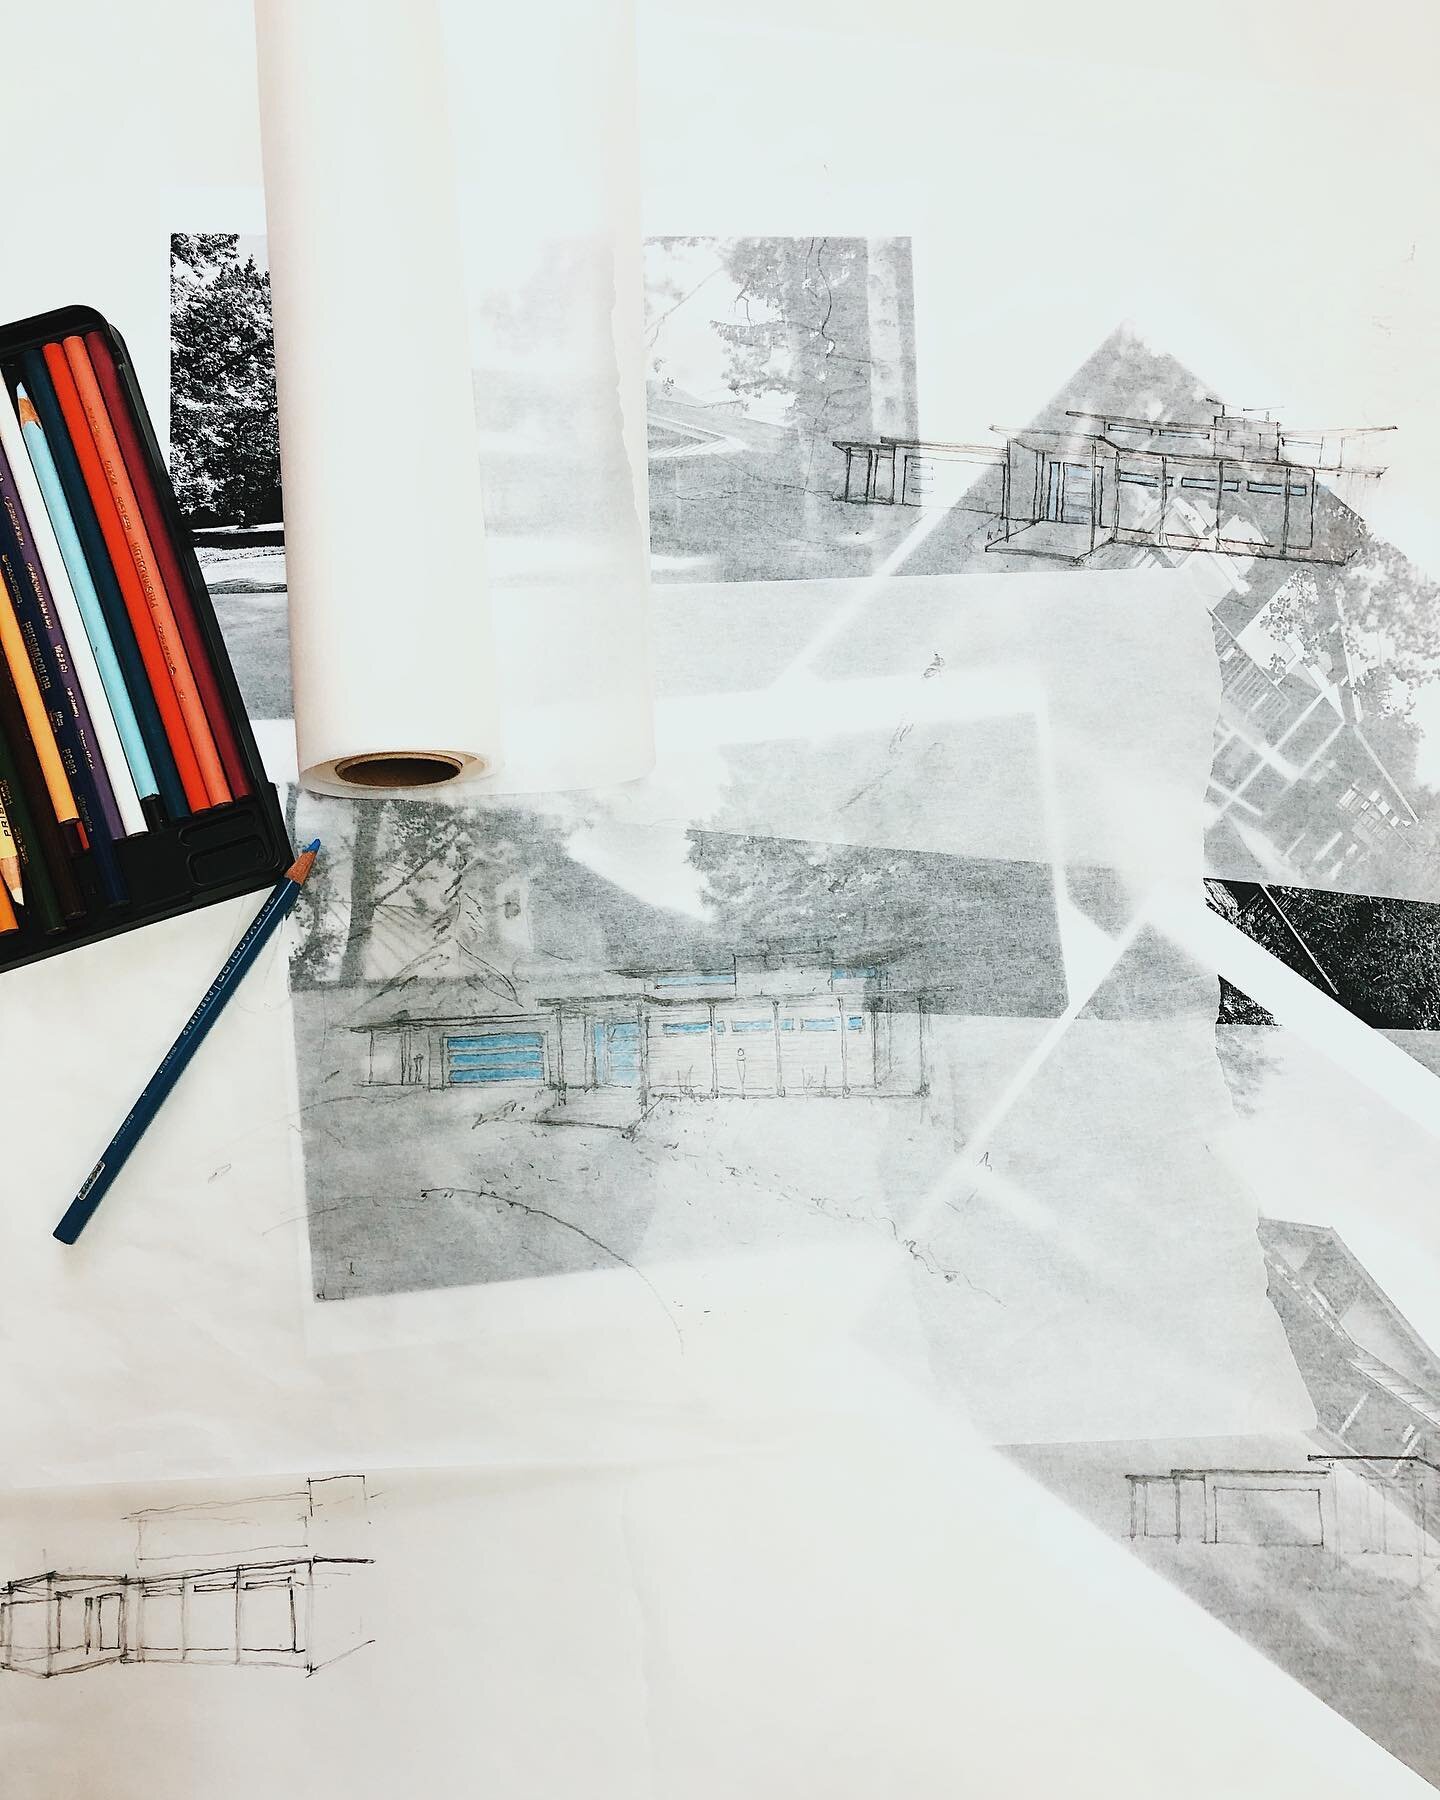 Friday morning sketching. Find a roll of trace and let the creativity out, process.

#kadesignworks 
.
.
.
.
#aspenarchitects #aspensnowmass #aspenarchitecture #handsketch #handsketching #designprocess #tracesketch #sketchingdaily #sketchoftheday #pr